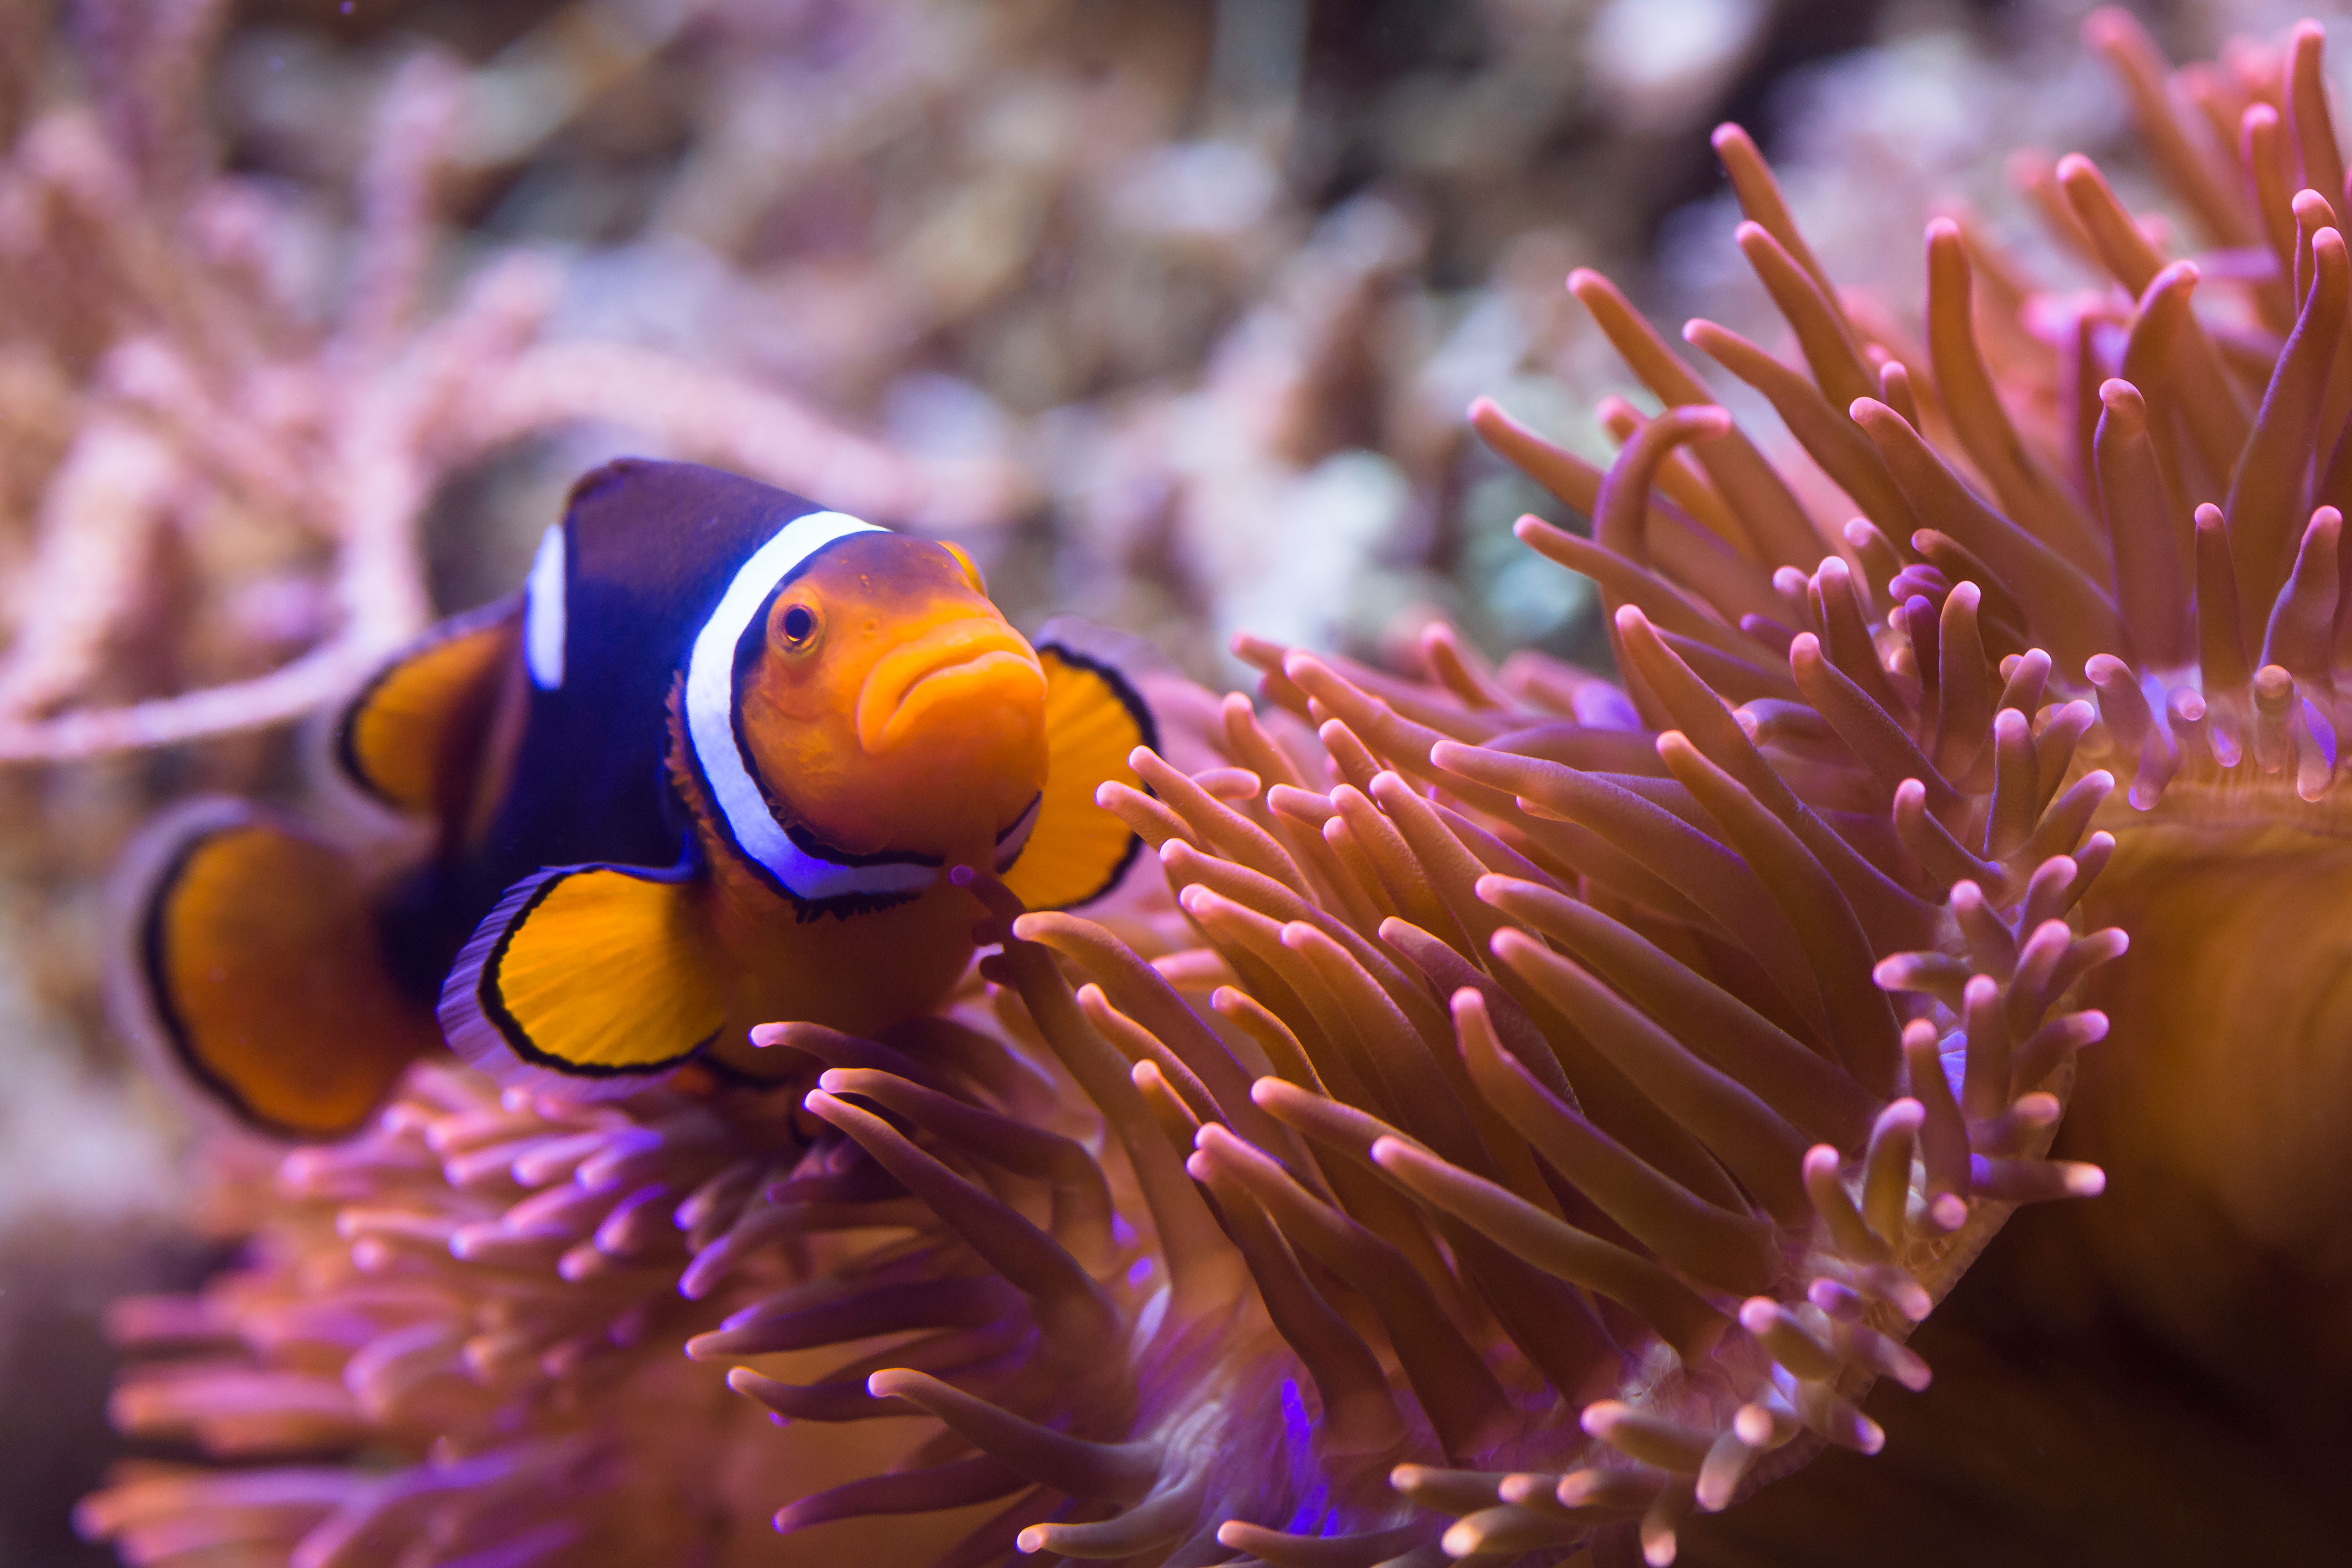 Did you know that all clownfish are born male?